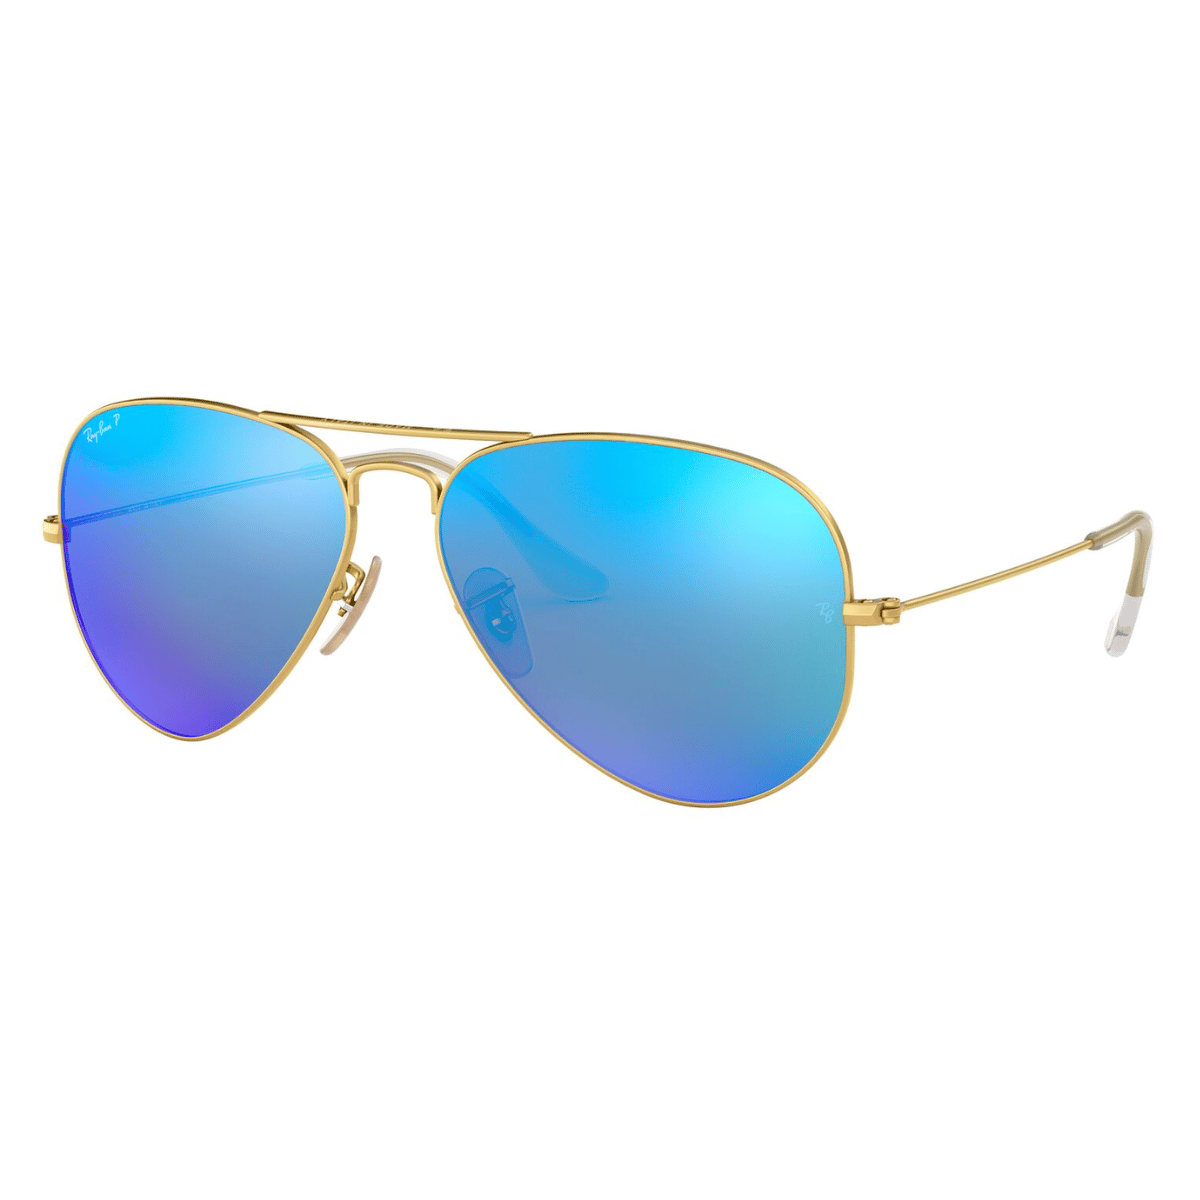 "Upgrade Your Look with Ray-Ban Aviator Sunglasses: Optorium offers the RB3025 112/4L 58-14 Sunglasses with flash lenses. Perfect for men and women seeking stylish and cooling glasses, available in multiple colors."